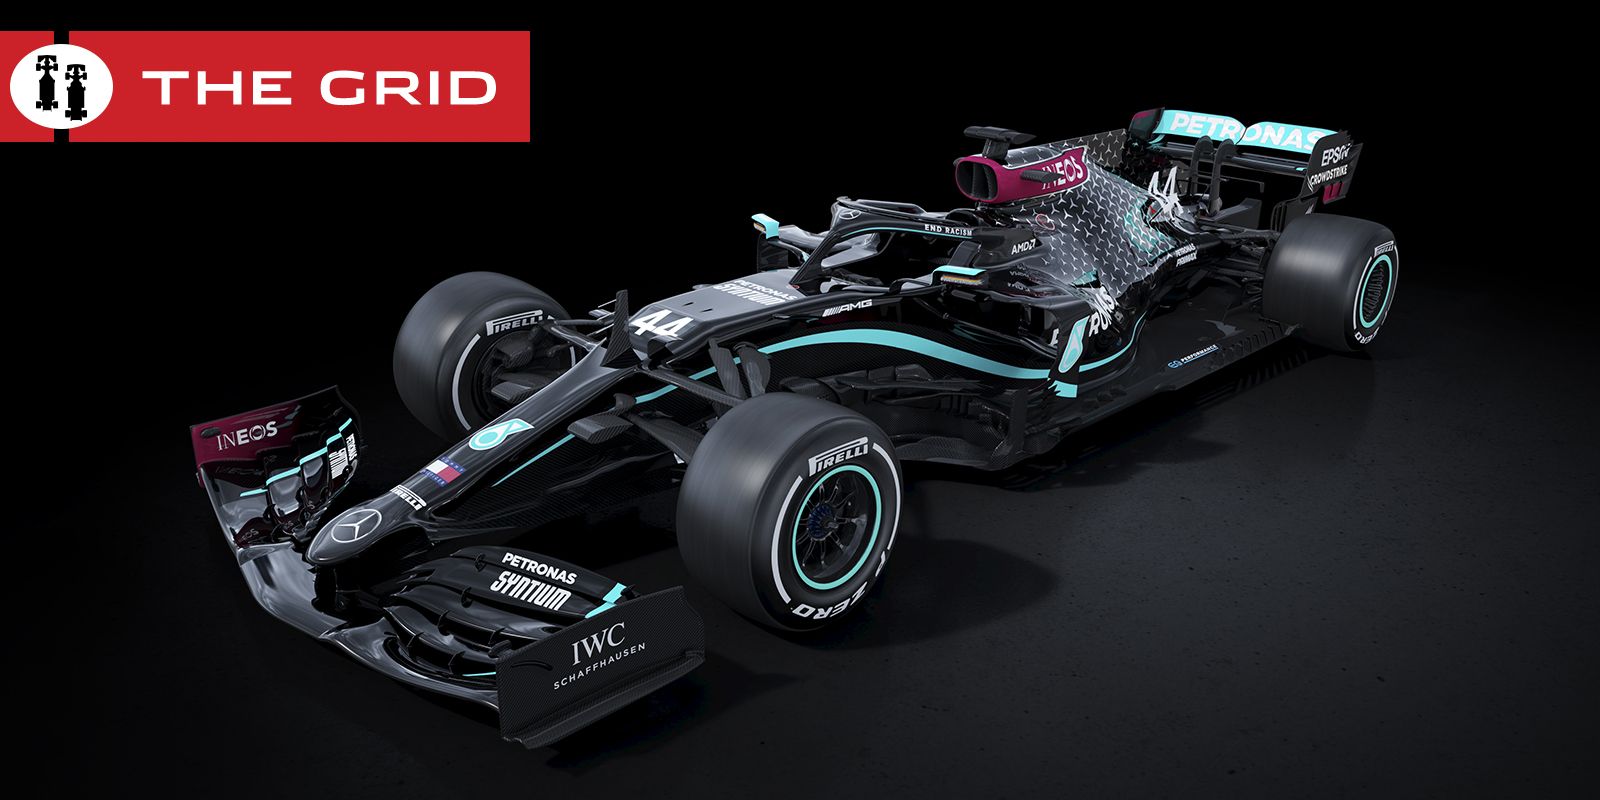 Mercedes F1 Team Will Run a Black Livery In Support of Black Lives Matter